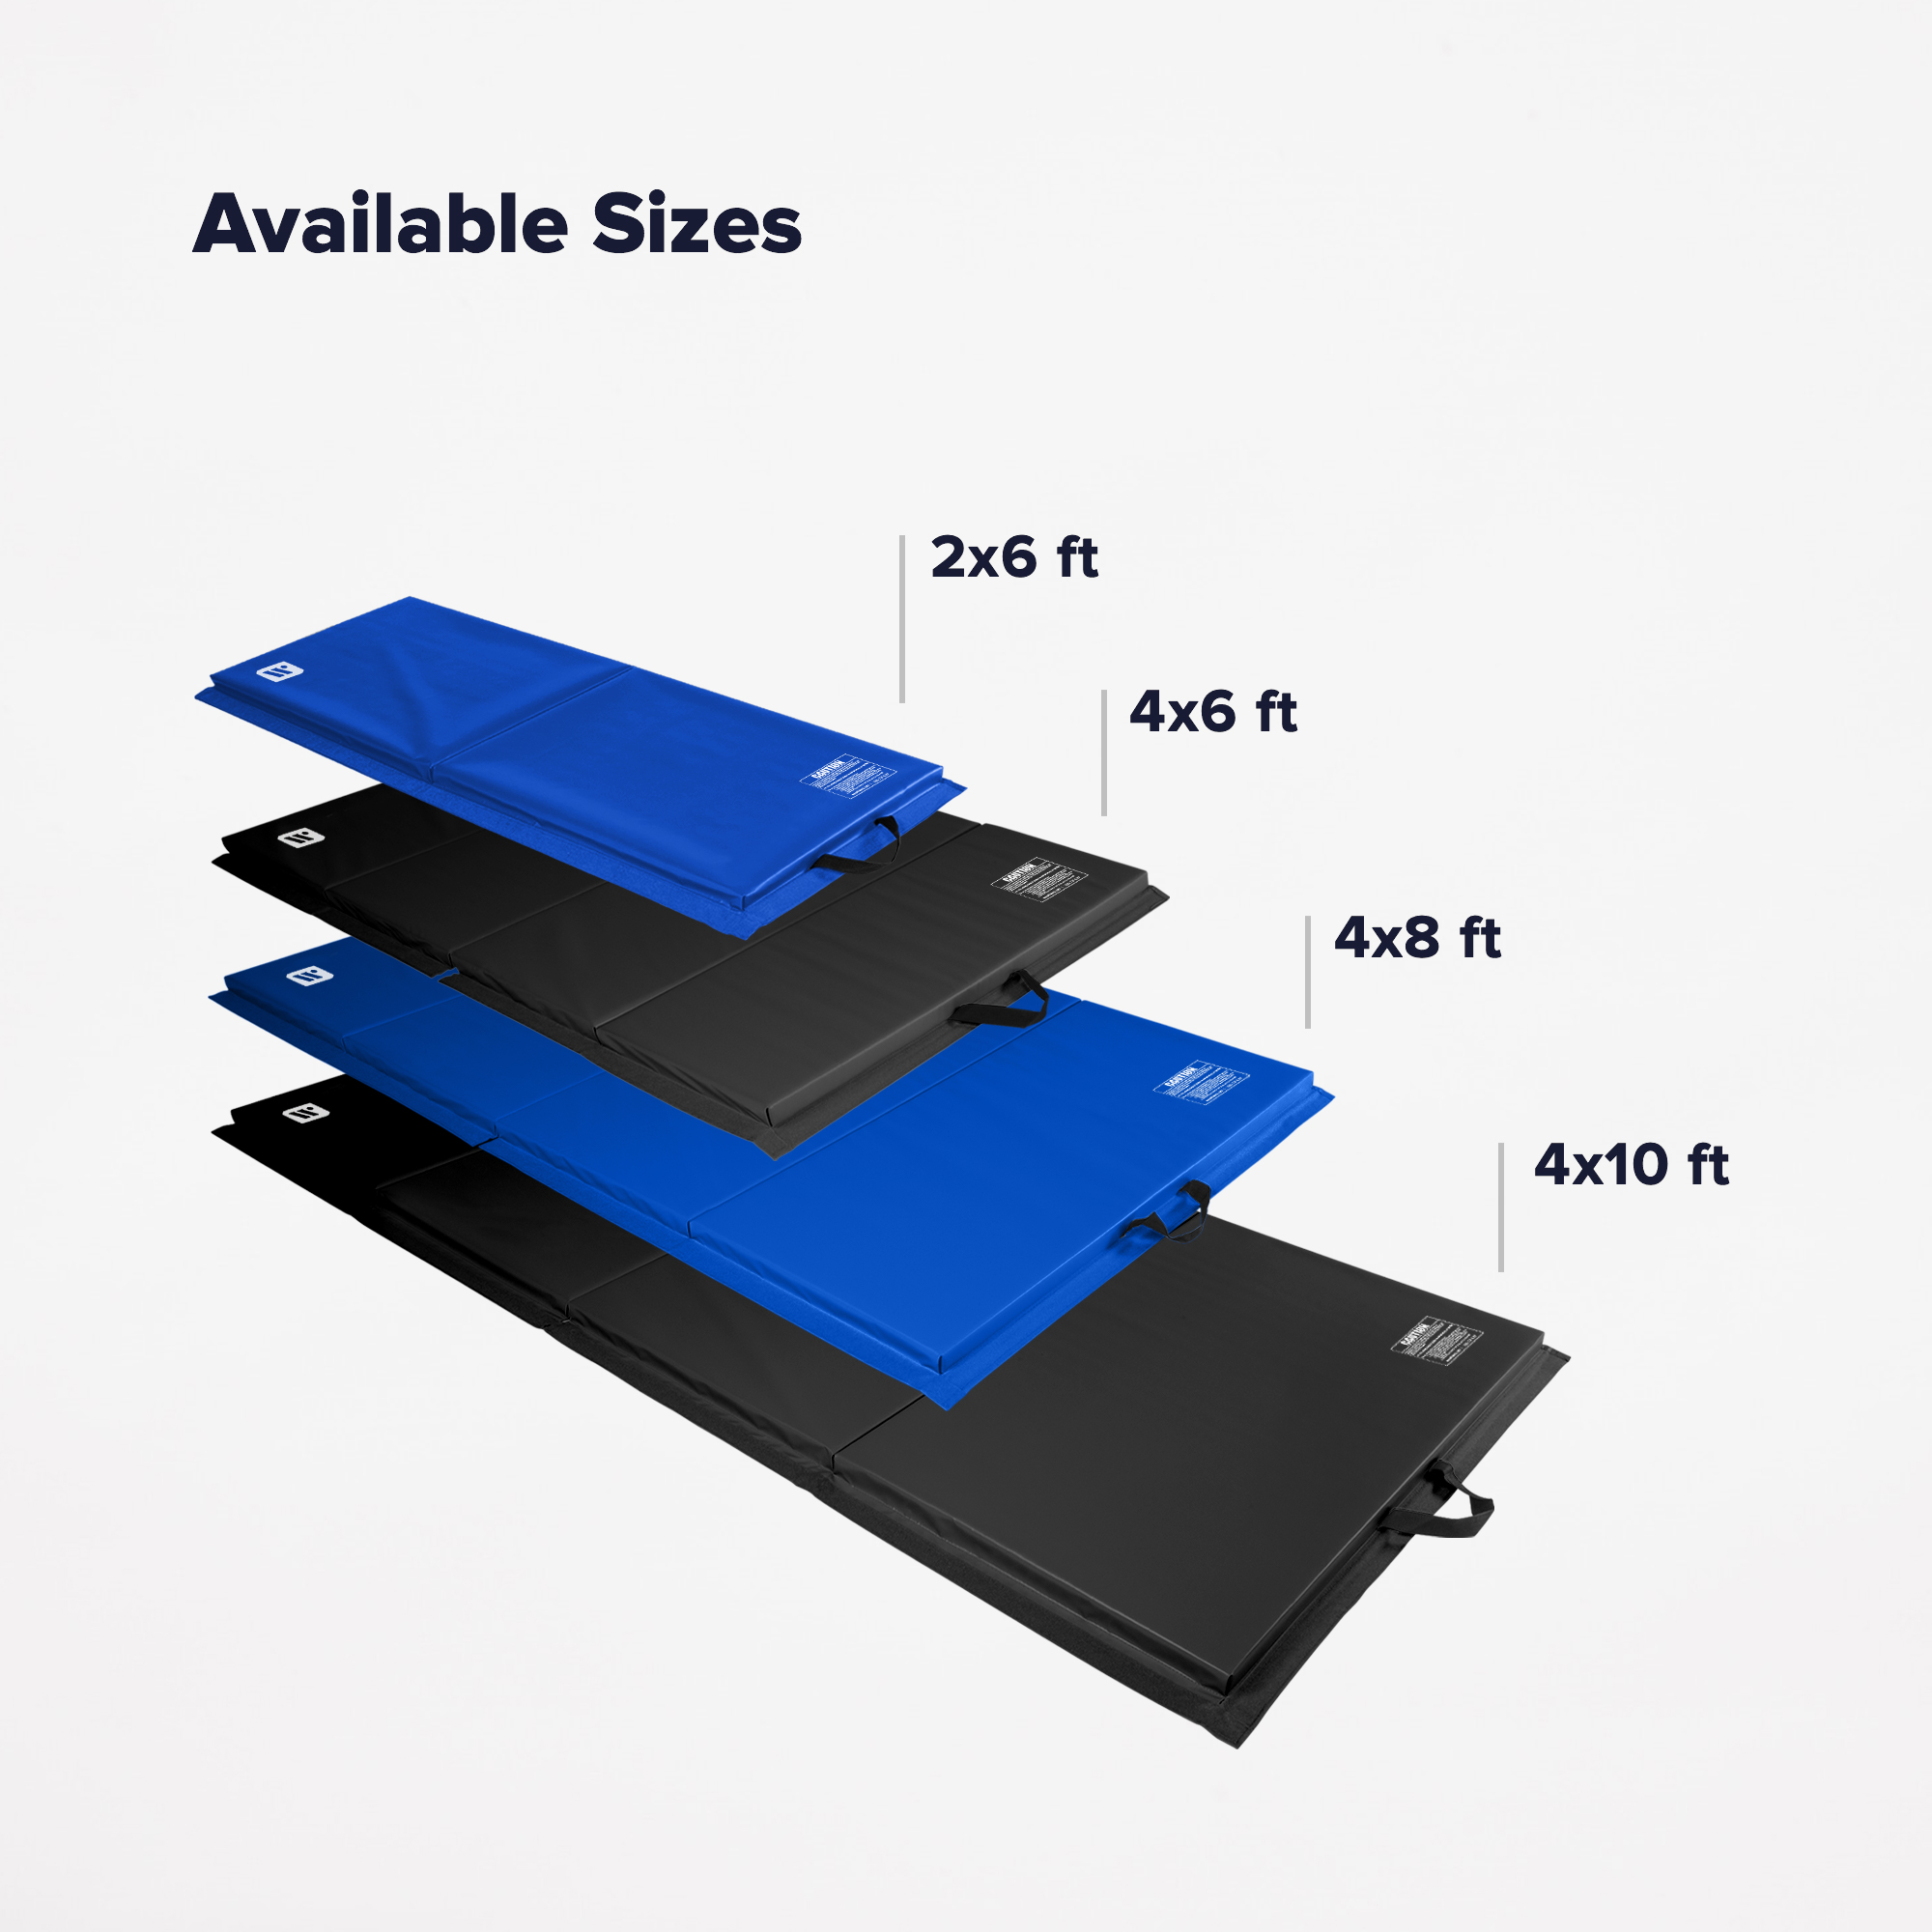 We Sell Mats 4 ft x 10 ft x 2 in Personal Fitness & Exercise Mat, Lightweight and Folds for Carrying - image 2 of 9